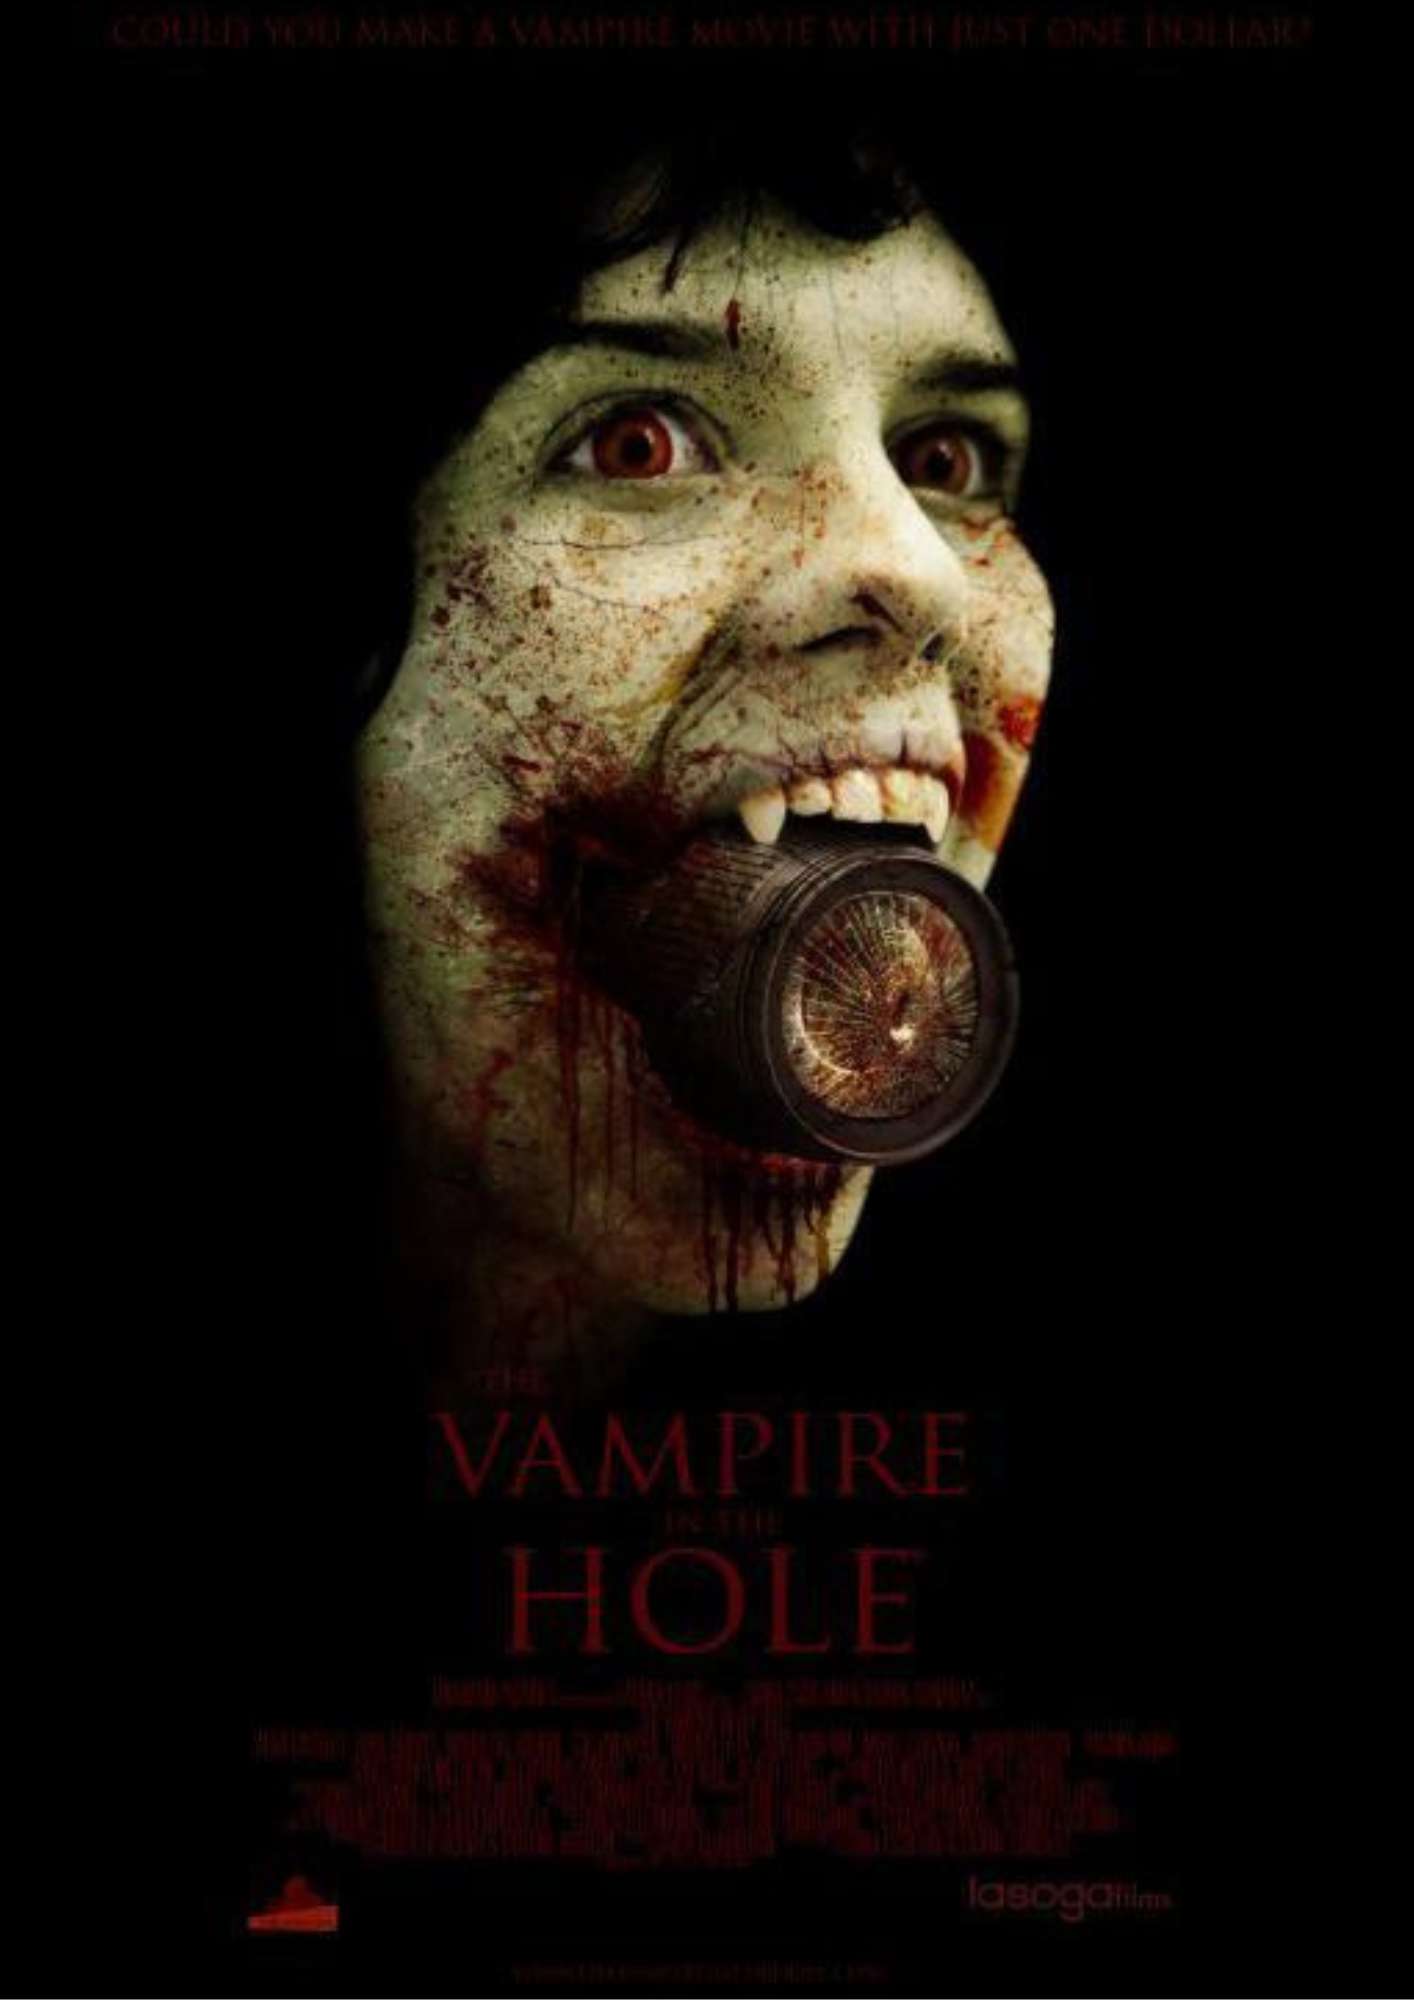 The vampire in the hole